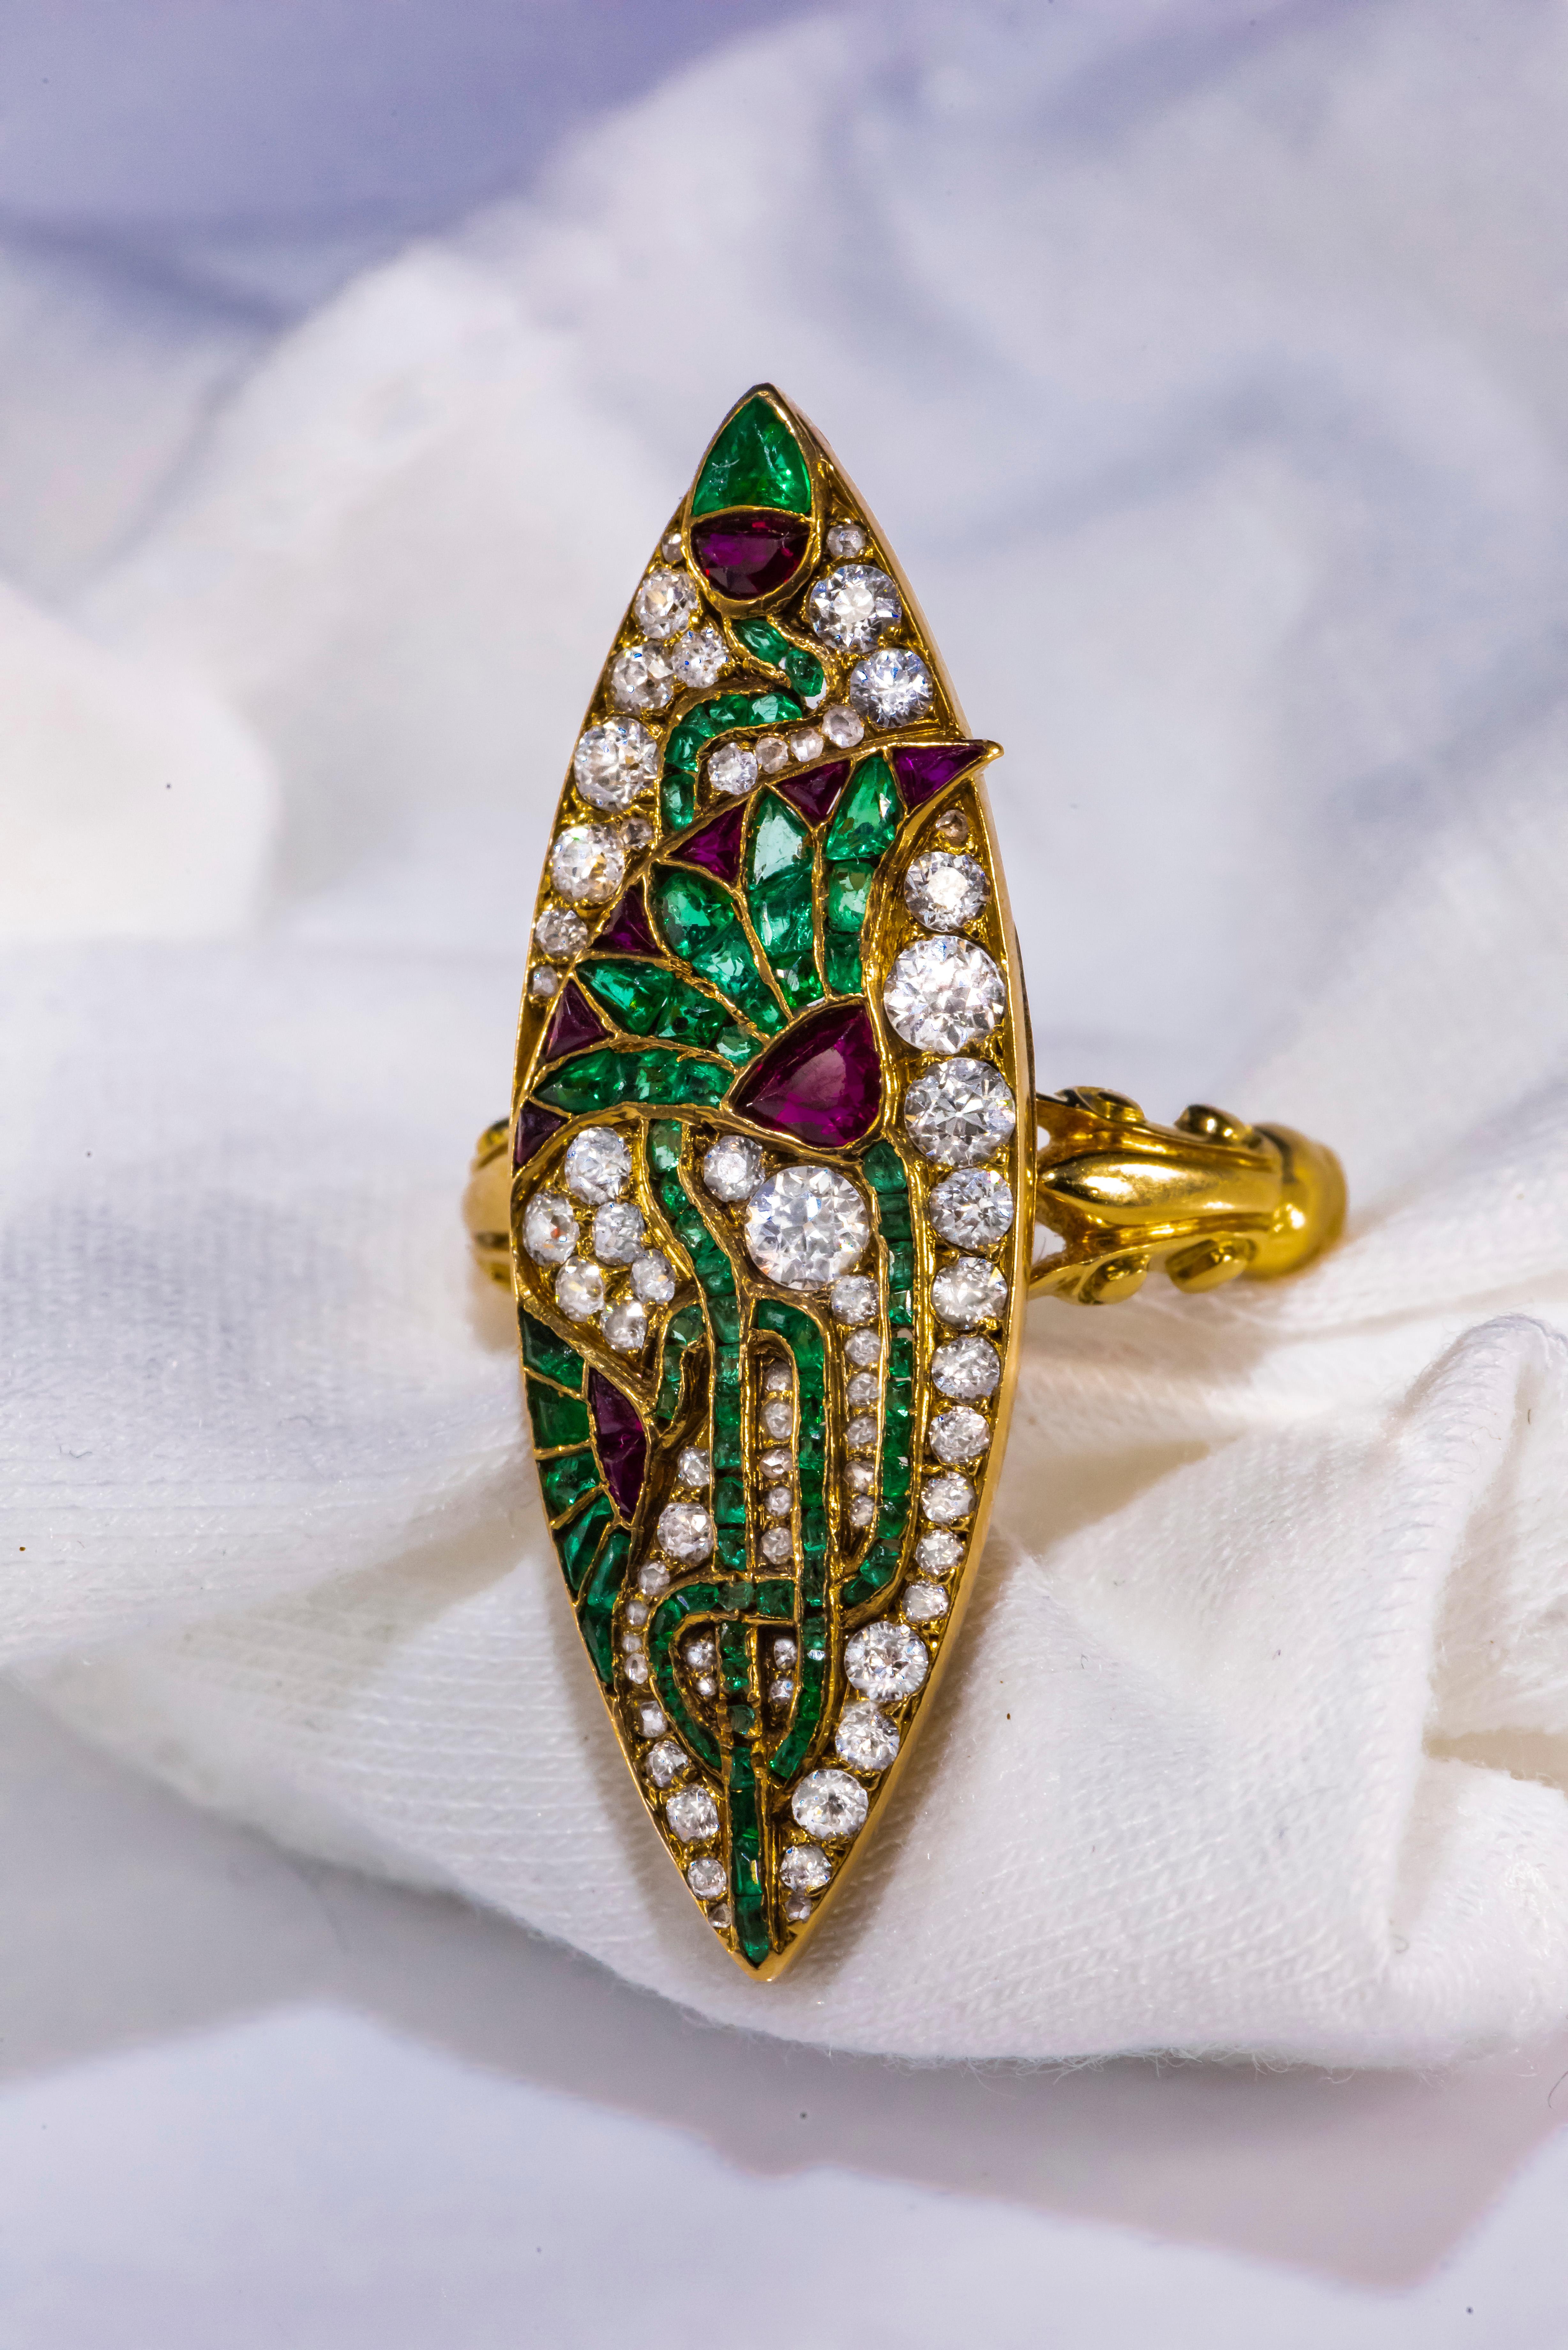 Impressive 1890s French Egyptian Revival Motif Ruby Emerald Diamond Lotus Ring For Sale 4